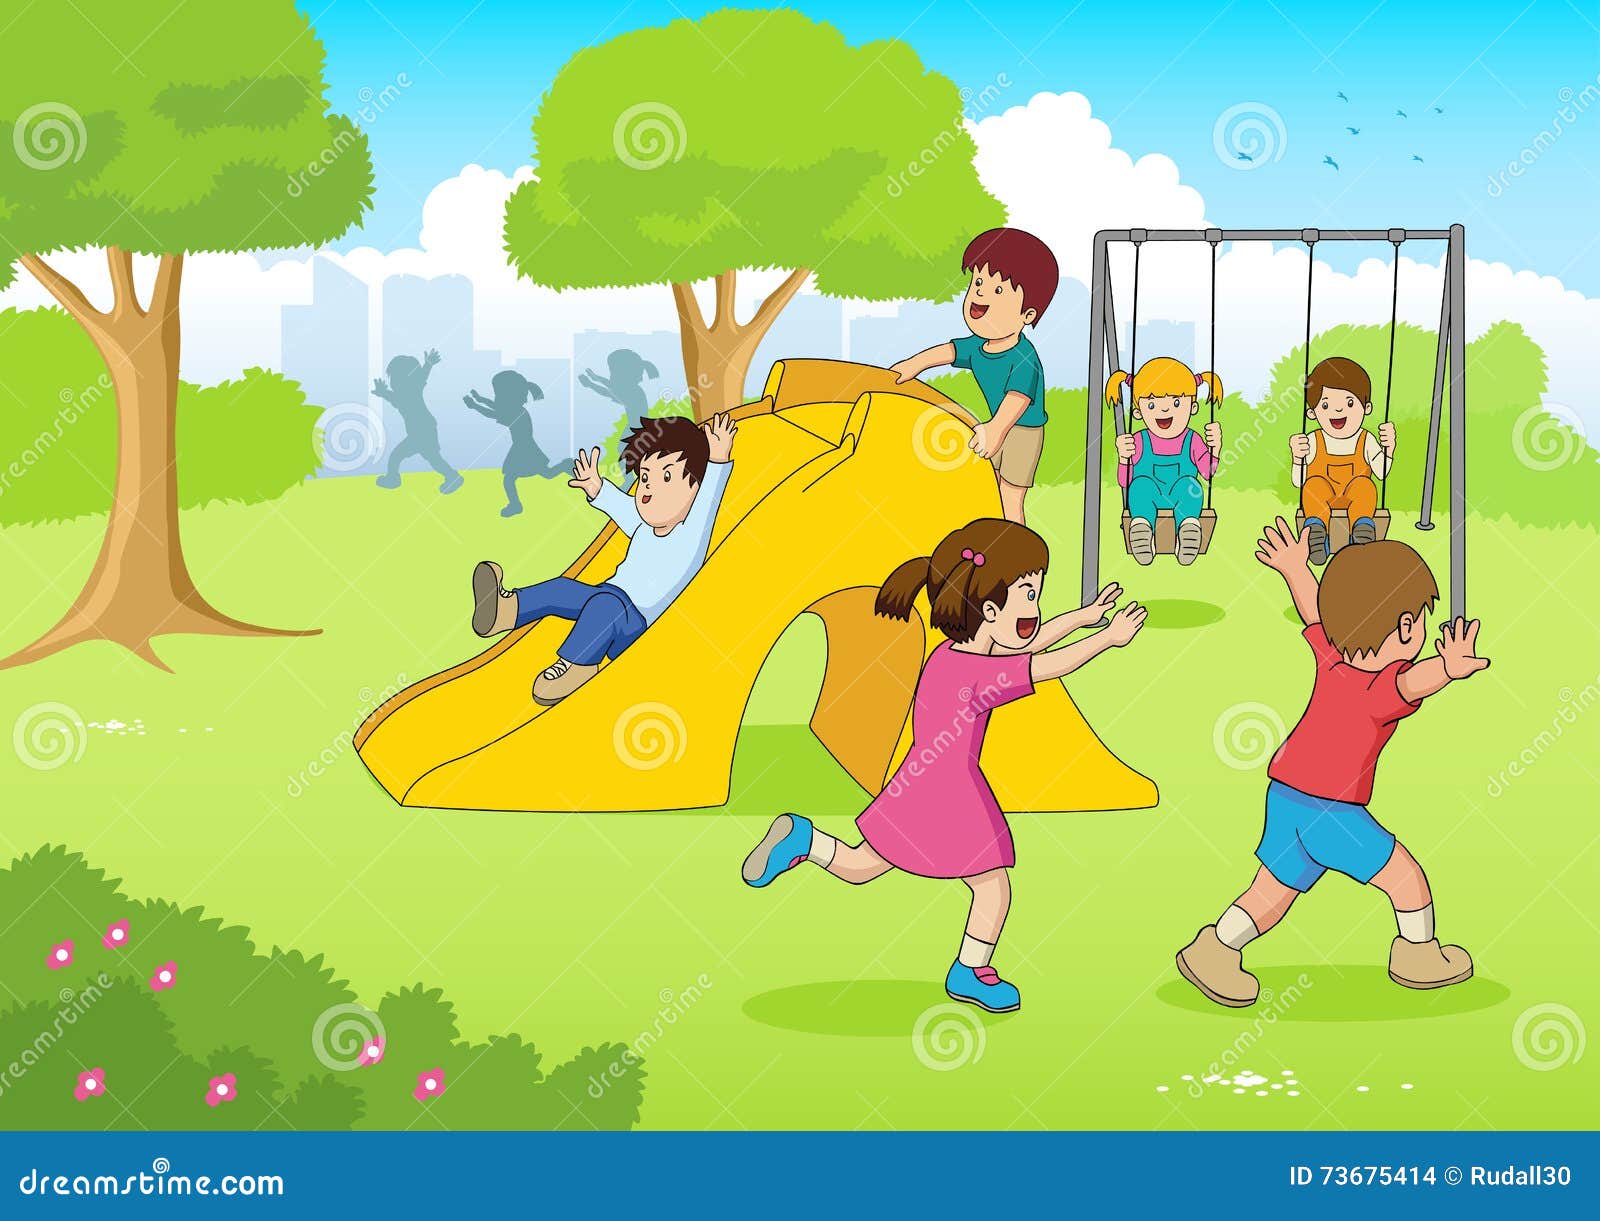 Playing at the Park stock vector. Illustration of playful - 73675414